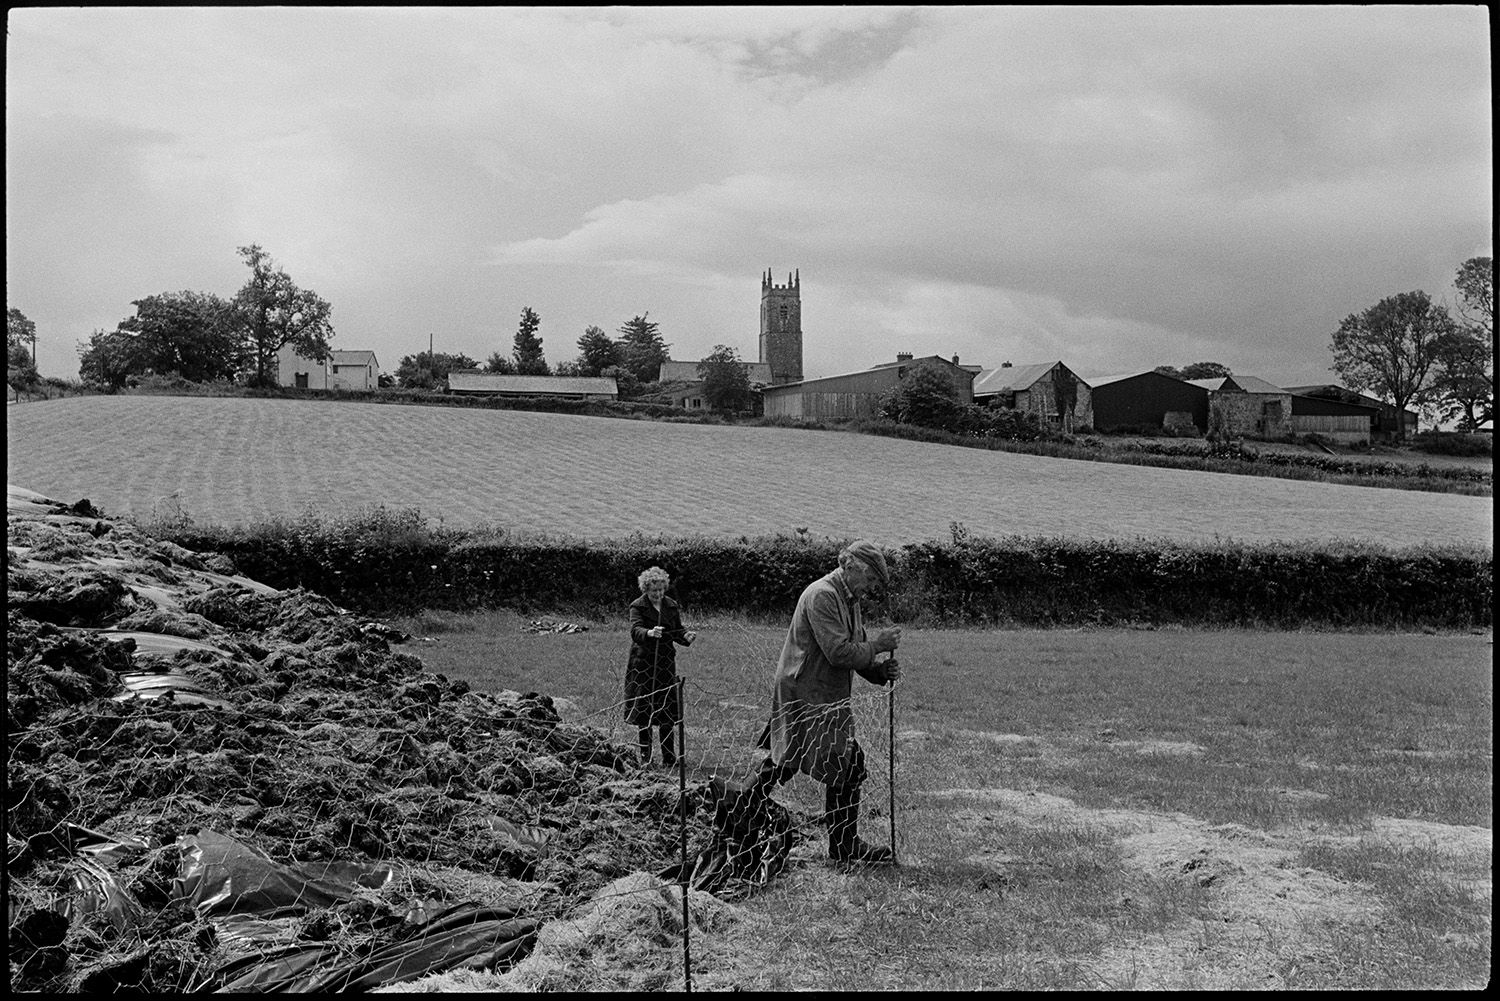 Farmers checking sheep and fencing off silage heap. Church with tower behind.
[Mr and Mrs Dunn setting up a wire netting fence around a silage heap at Brimblecombe, Dowland. The church tower and farm buildings are visible in the background.]